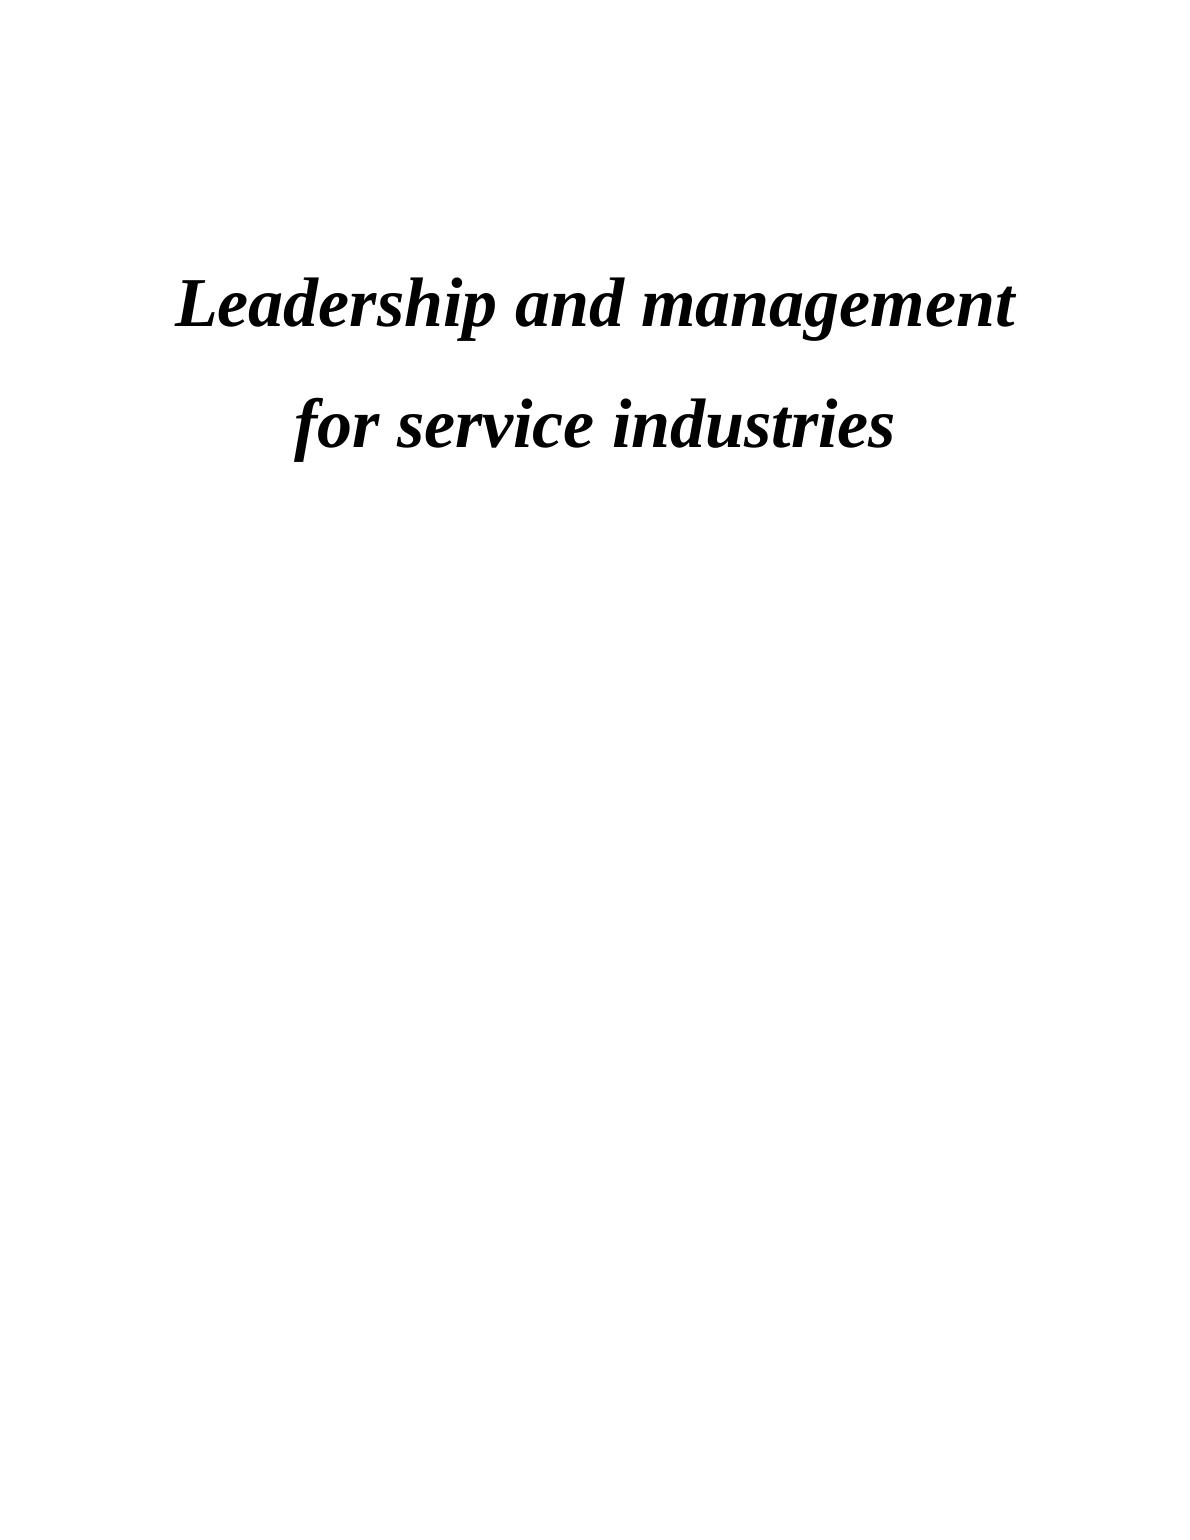 Leadership and Management for Service Industries - Doc_1